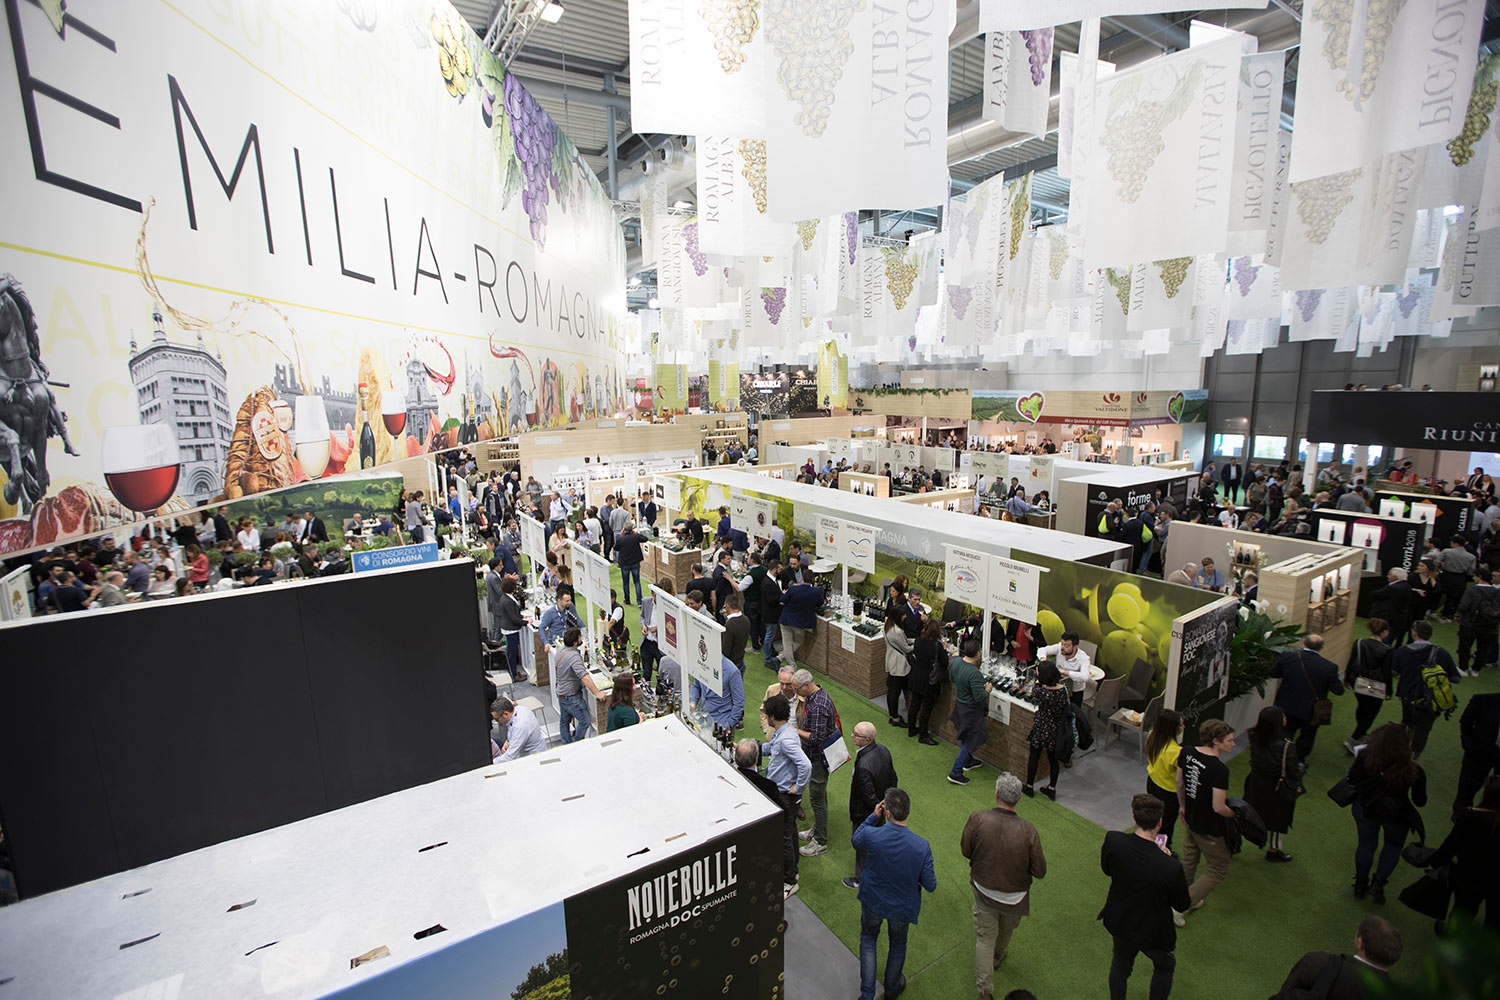 Exhibitions and fairs are a great opportunity for the Italian wineries to show themselves